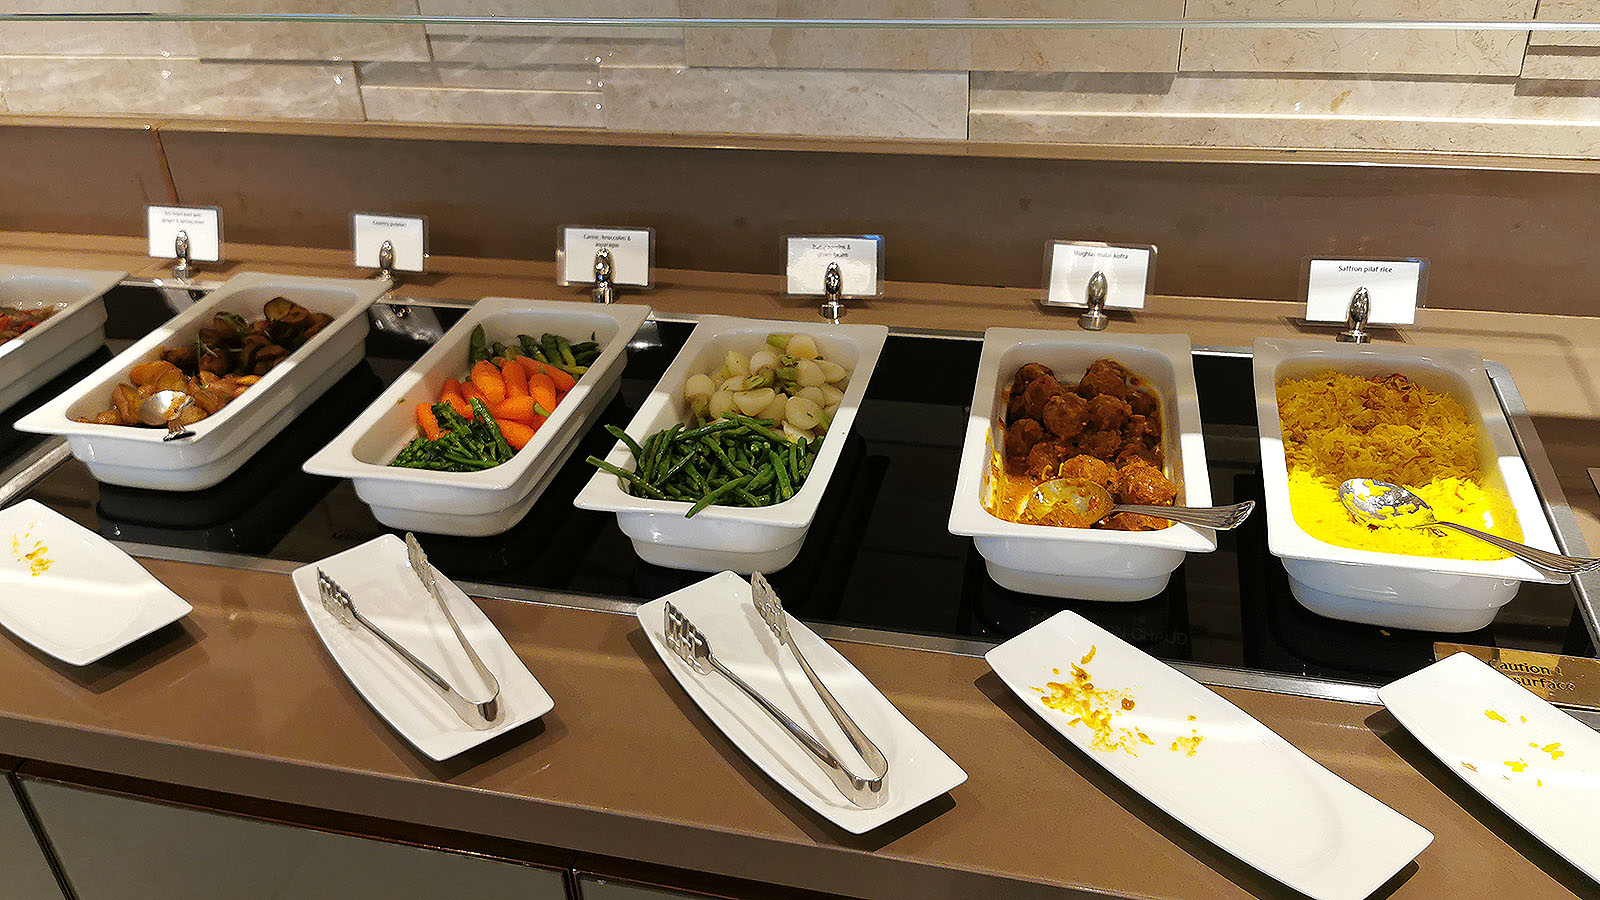 Hot buffet dishes at the Tan seating at the Emirates Lounge, Singapore